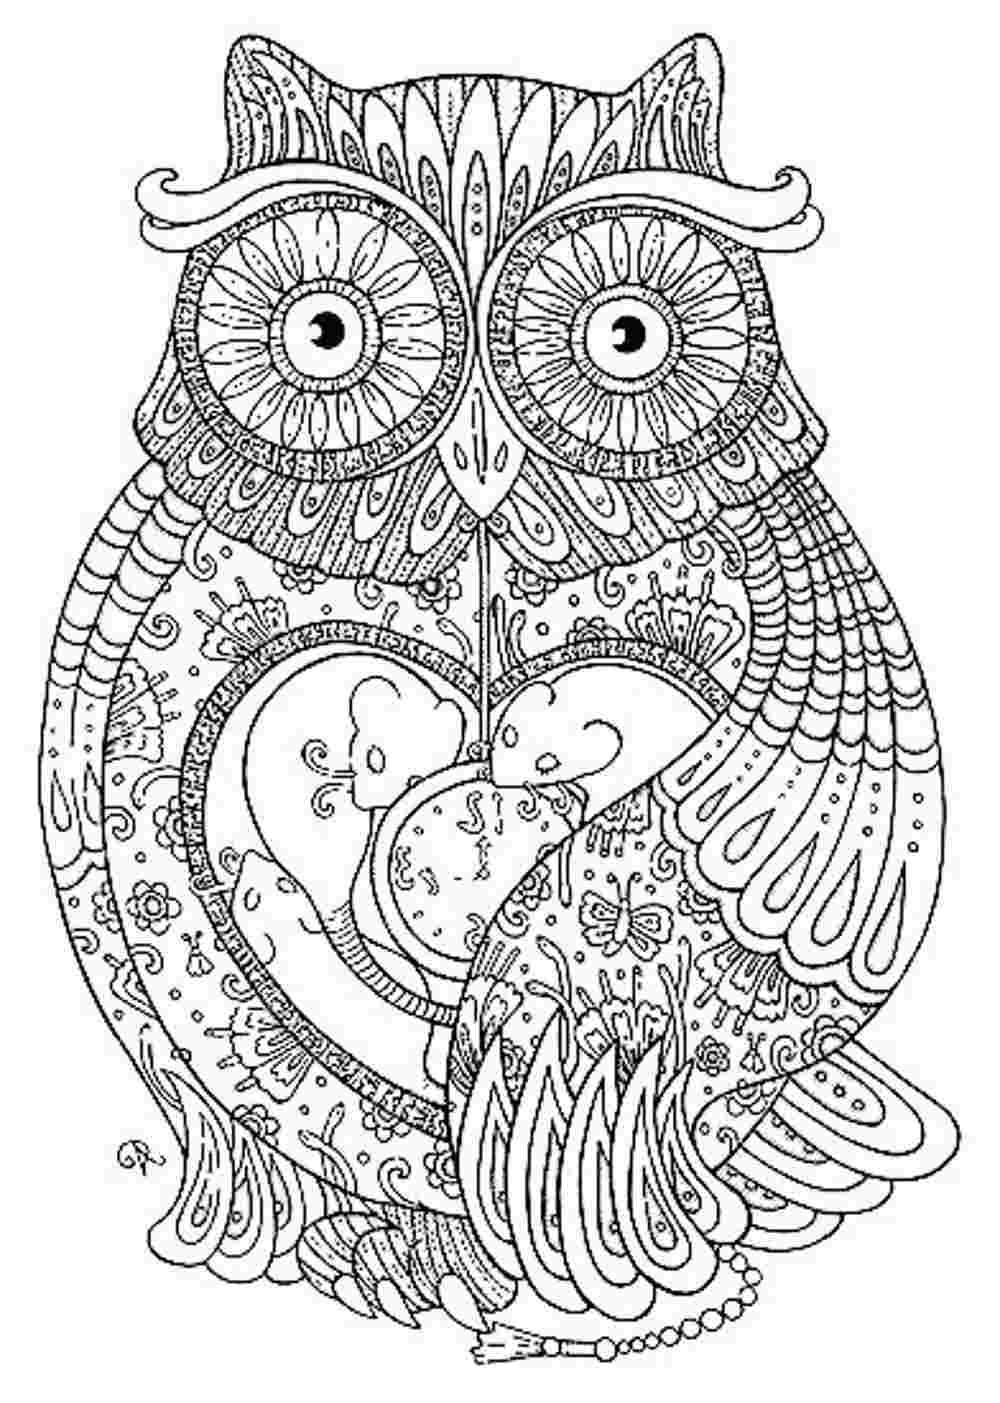 Coloring Pages For Adults Printable
 44 Awesome Free Printable Coloring Pages for Adults